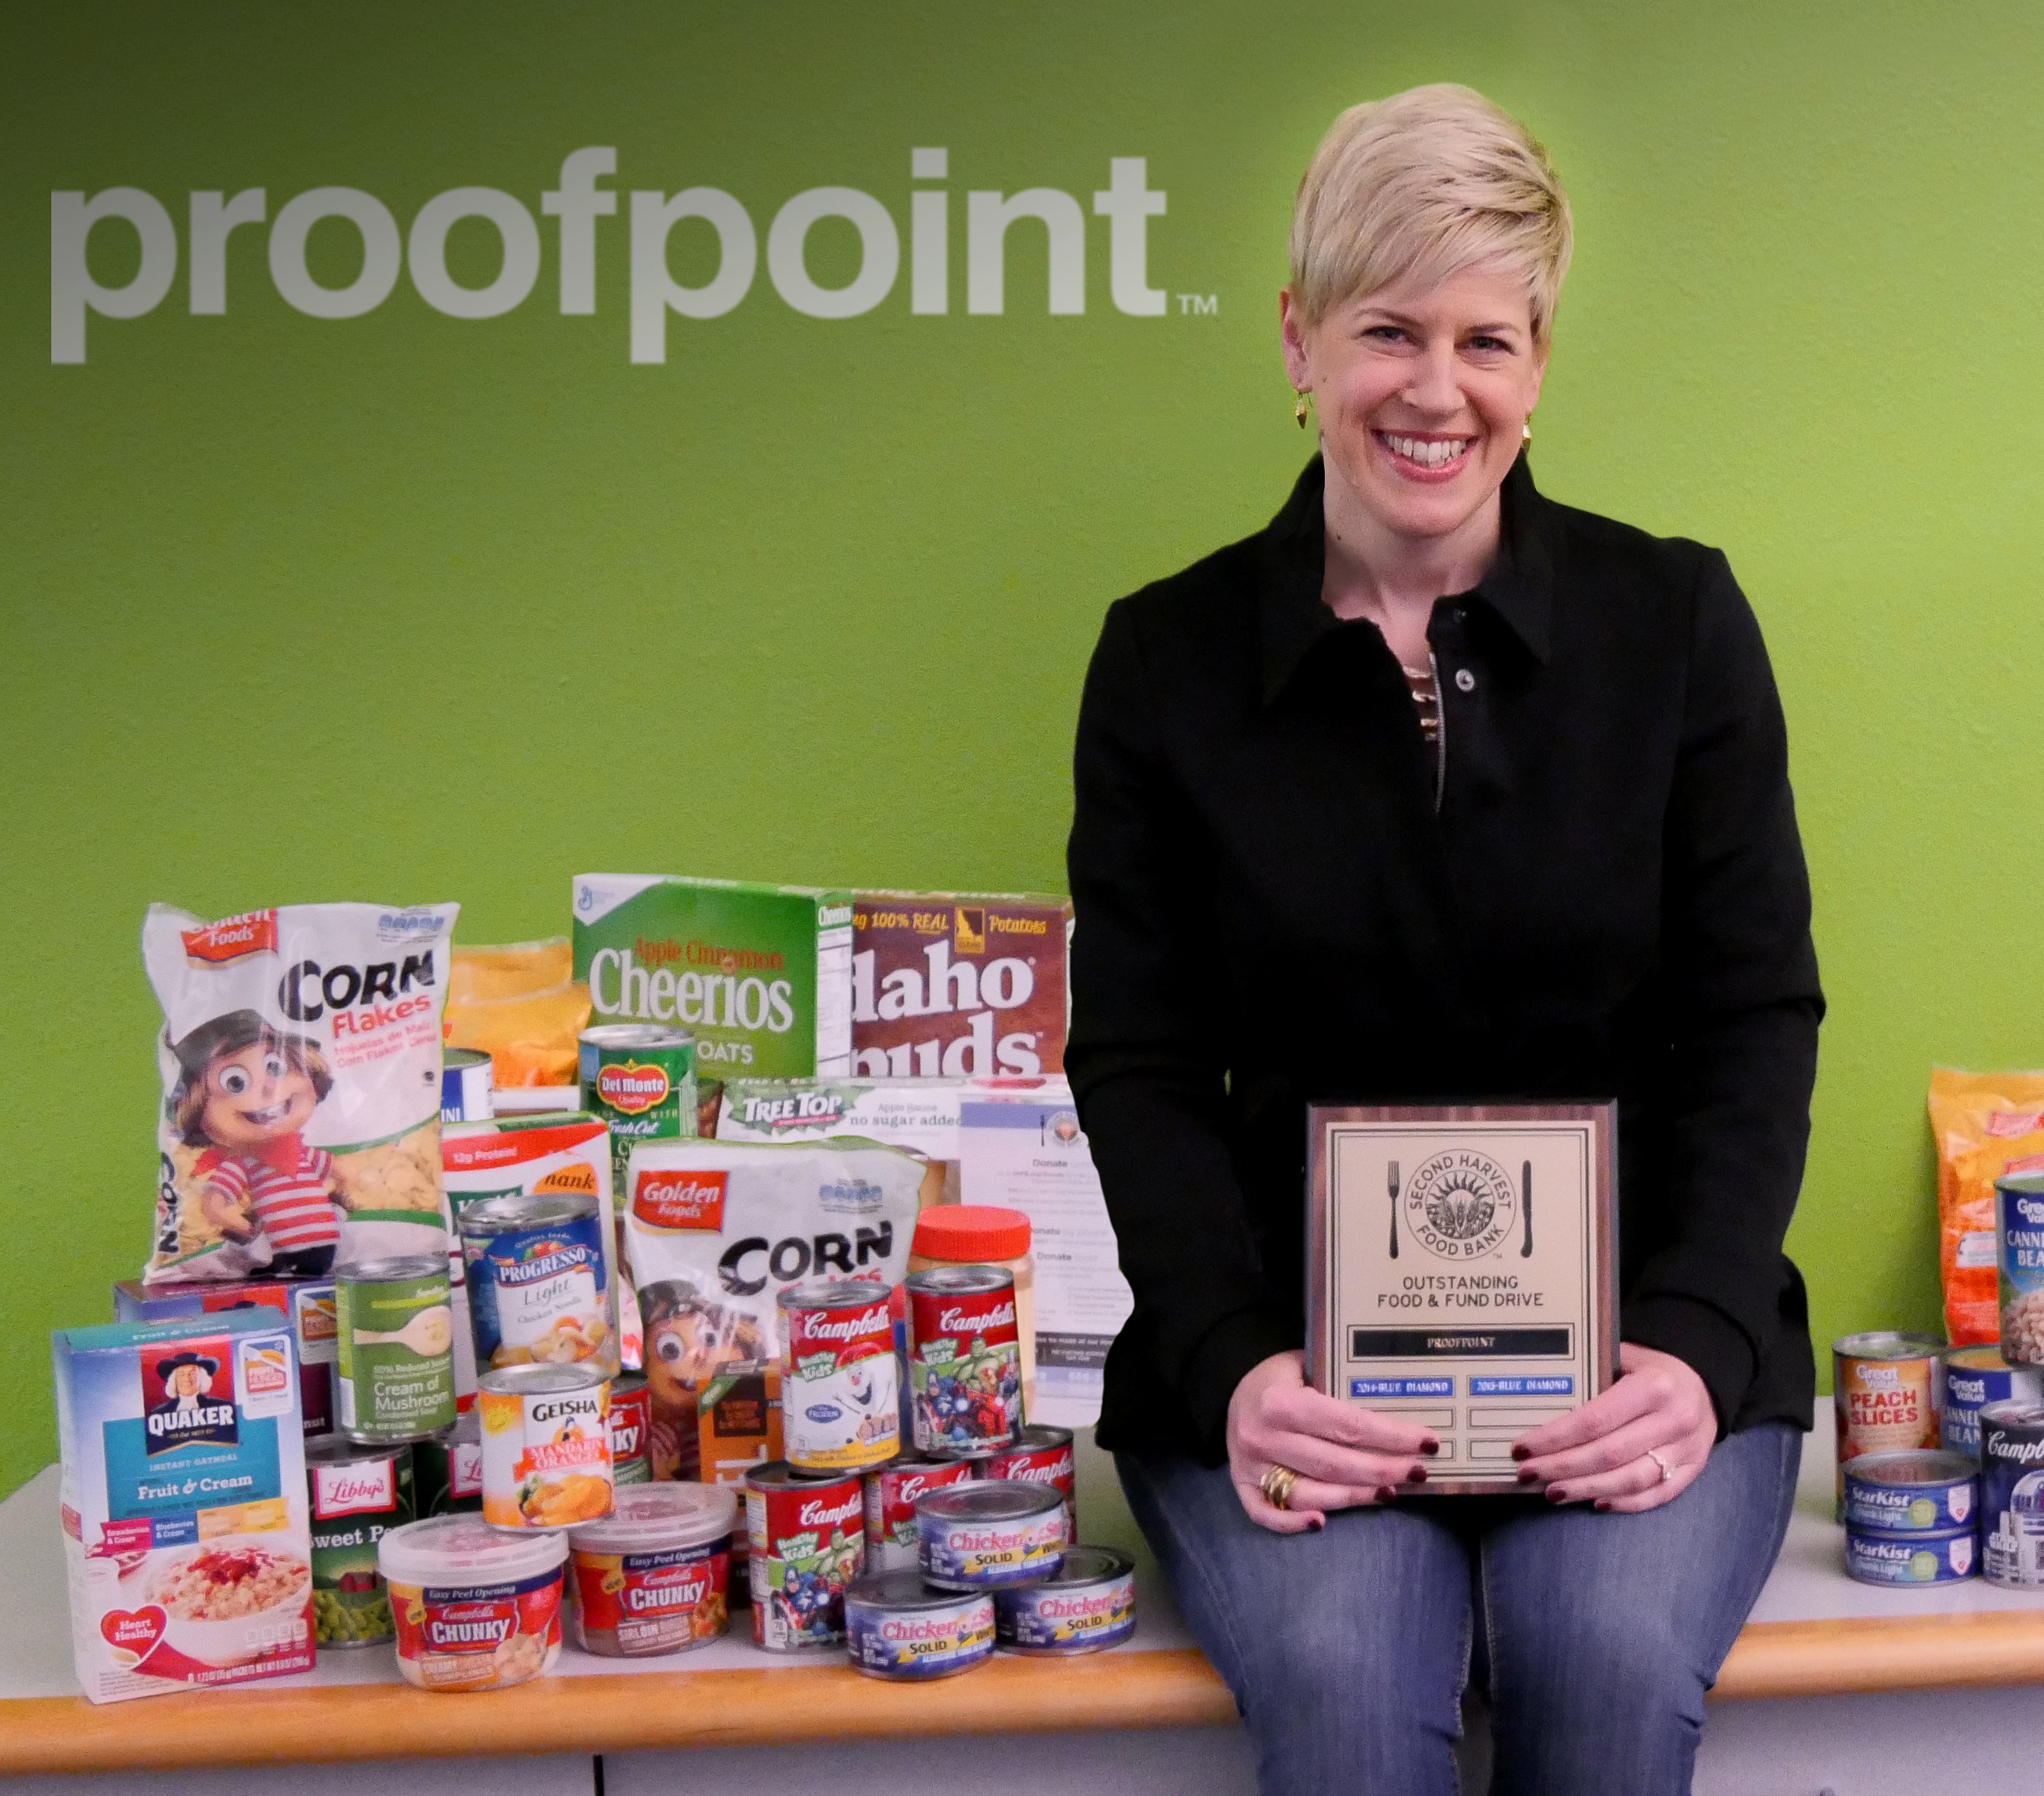 Second Harvest Food Bank recognizes Proofpoint with Blue Diamond Award